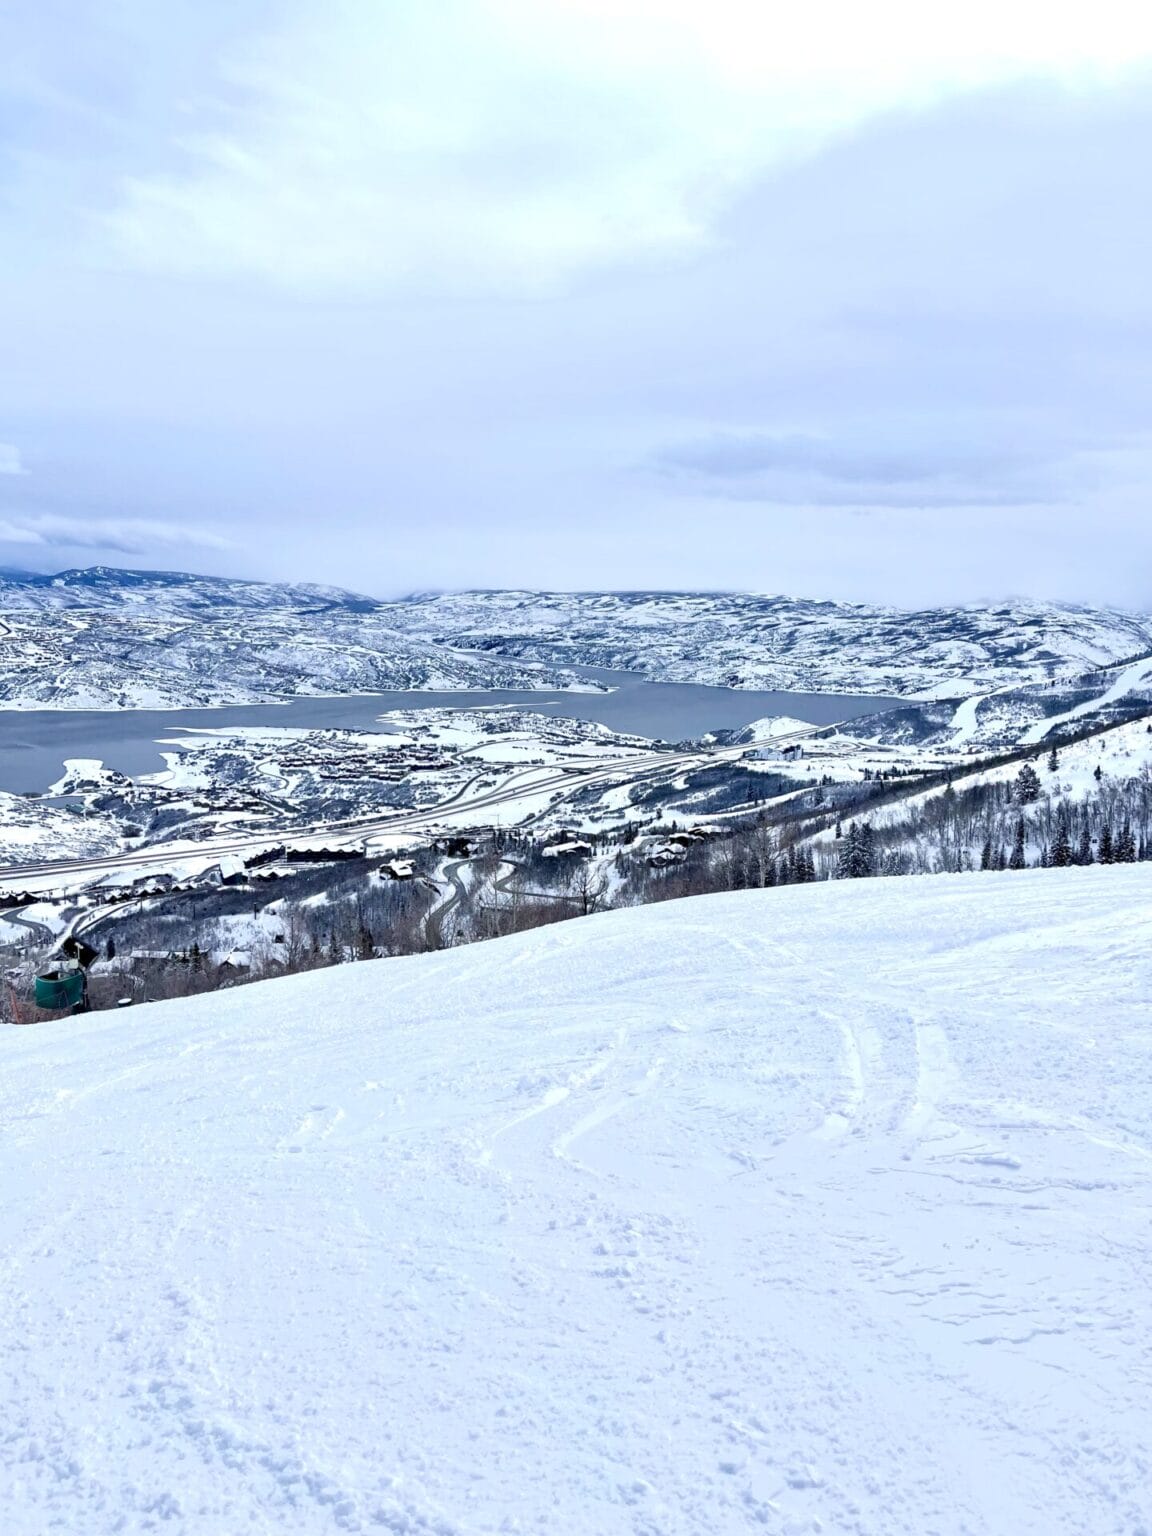 A scenic winter view from a snowy slope overlooking Deer Valley's East Village. The landscape is covered in a thick blanket of snow with patterns from ski activity visible in the foreground. A chairlift can be seen in the middle distance, and the village is nestled among rolling hills that extend to the frozen lake and snow-covered mountains in the distance. The sky is overcast with soft light filtering through the clouds, casting a serene glow over the chilly, picturesque setting.